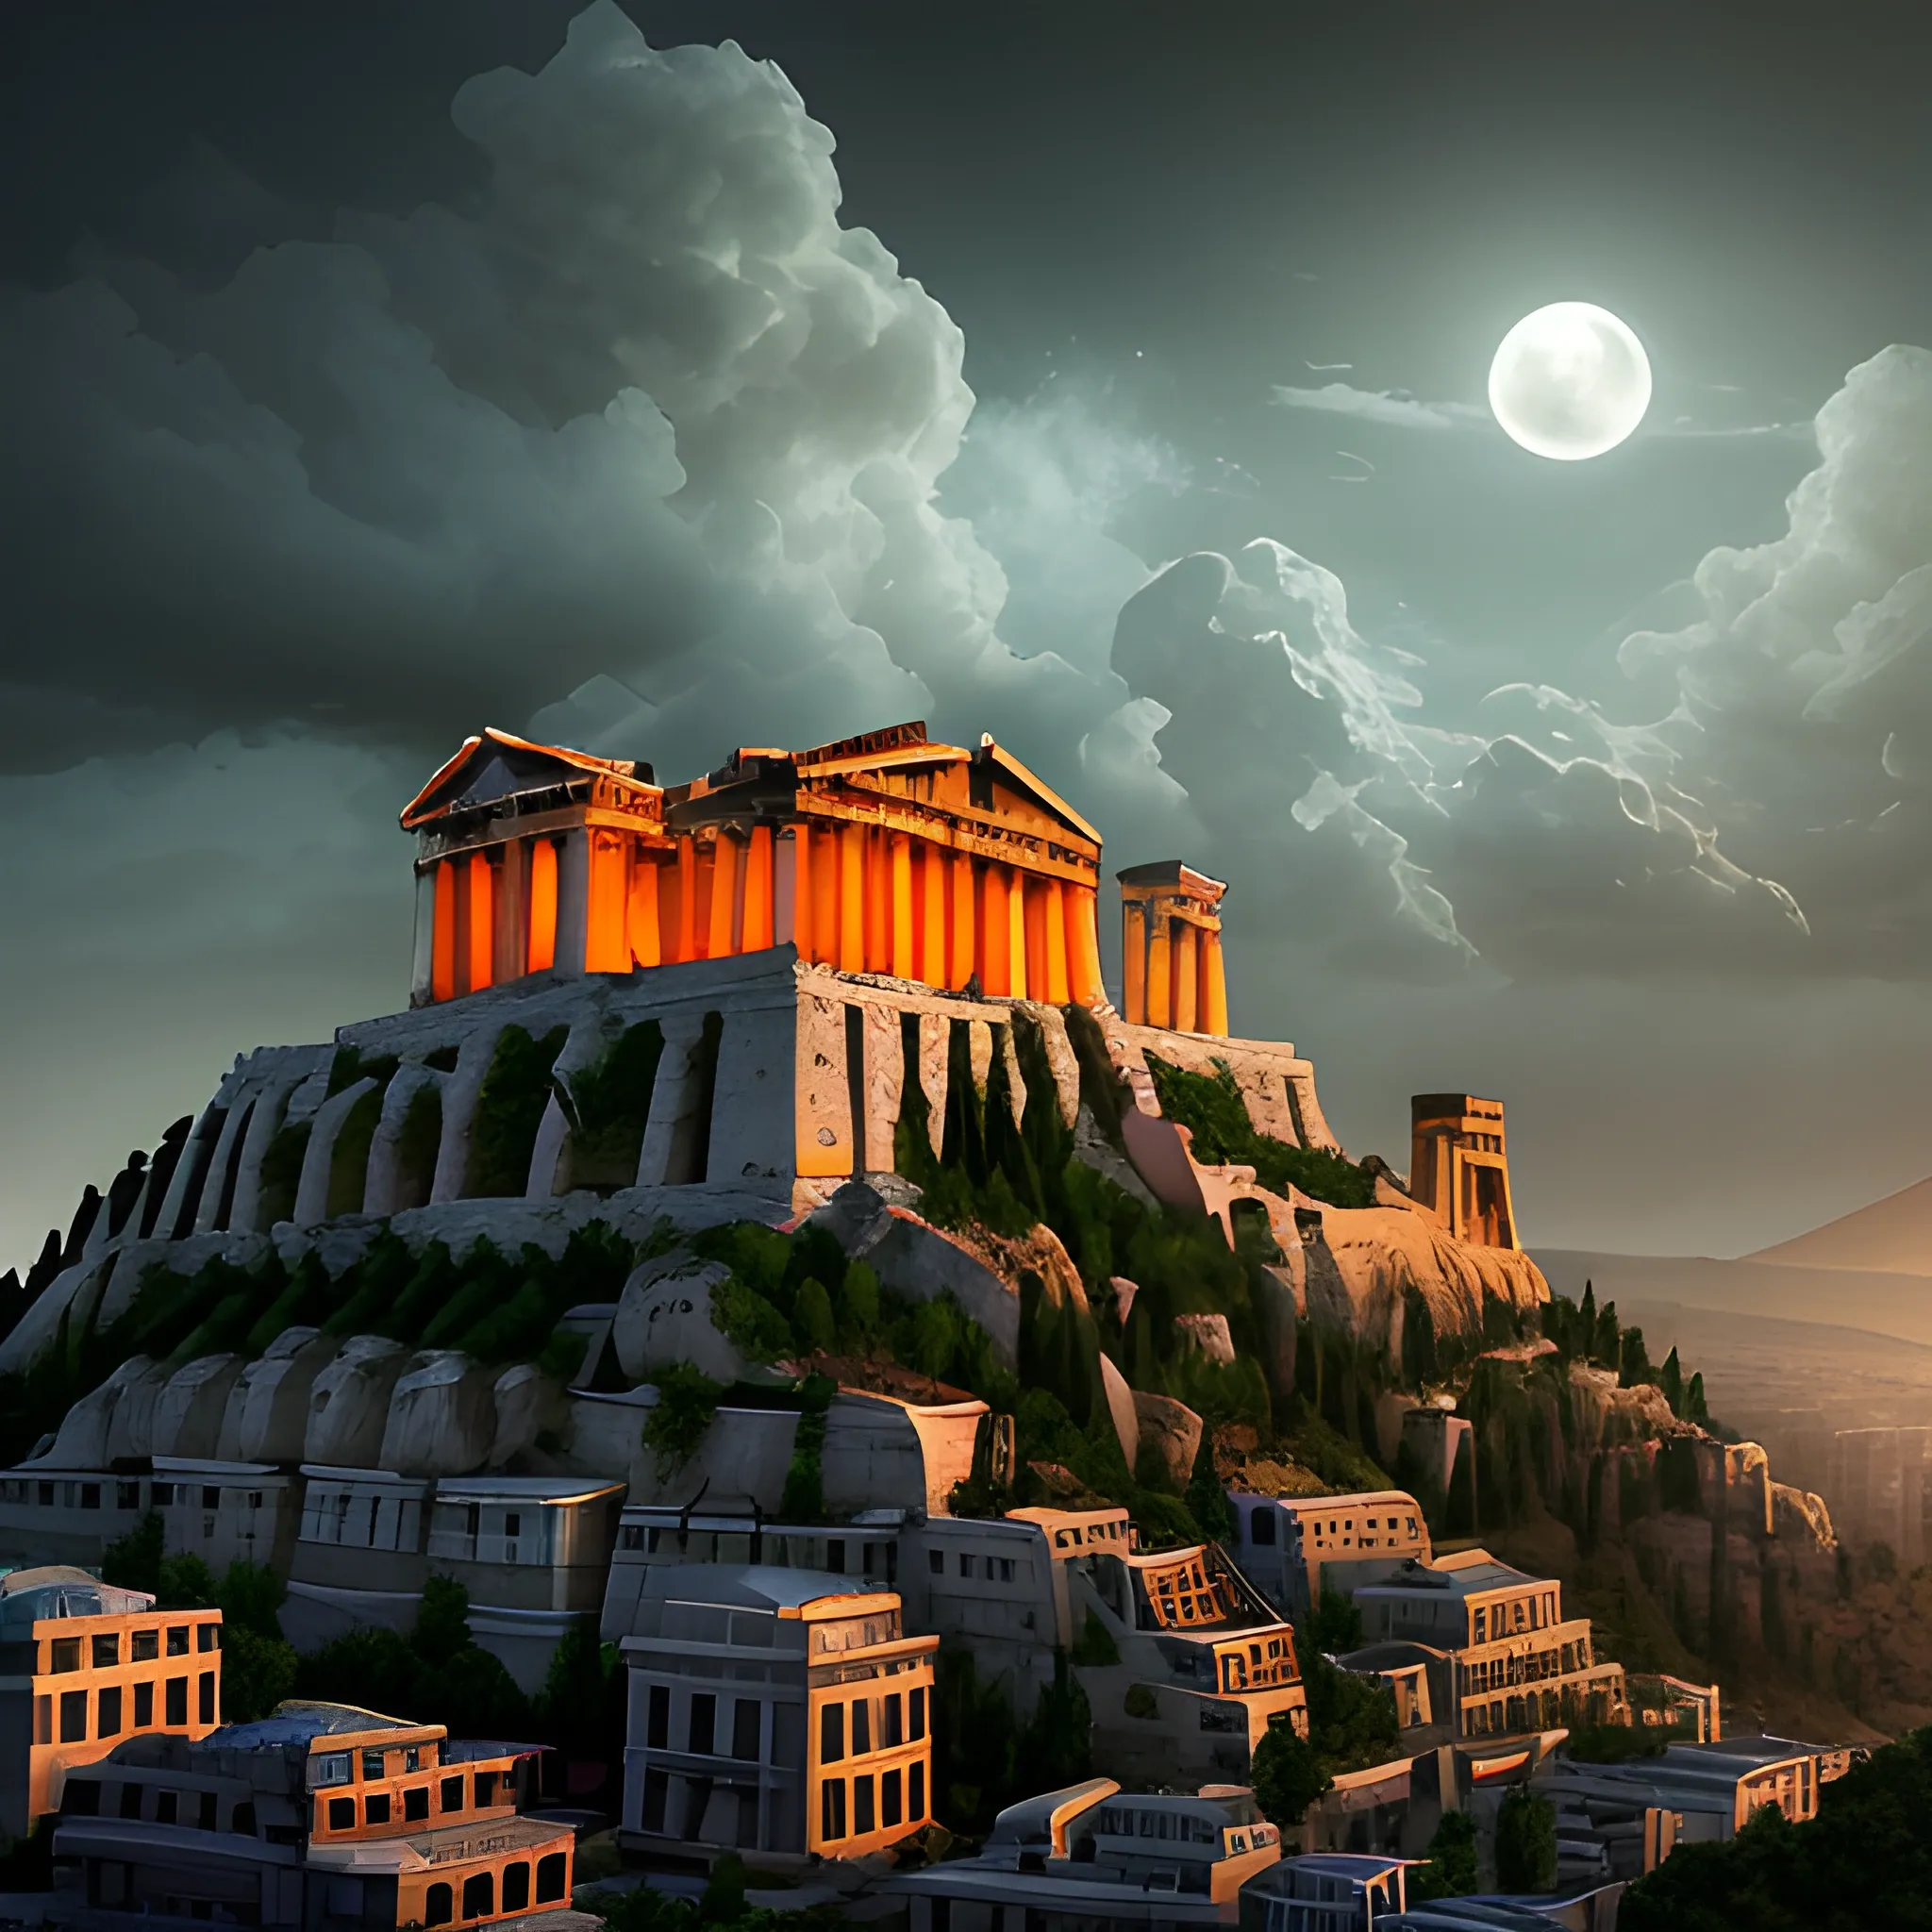 city of acropolis, on a high mountain, destroyed city, surrounded by clouds, dark environment, place of terror, dim lights, destruction, rot, green, night, darkness, dead vegetation, terror, fear, dark lighting, terror, moon, darkness , ruins, destroyed, death, ancient greece architectural details, detailed environment, hyper realistic, devil city, decay, rot, 8k details, wide angle, 3d, panoramic view, slasher style